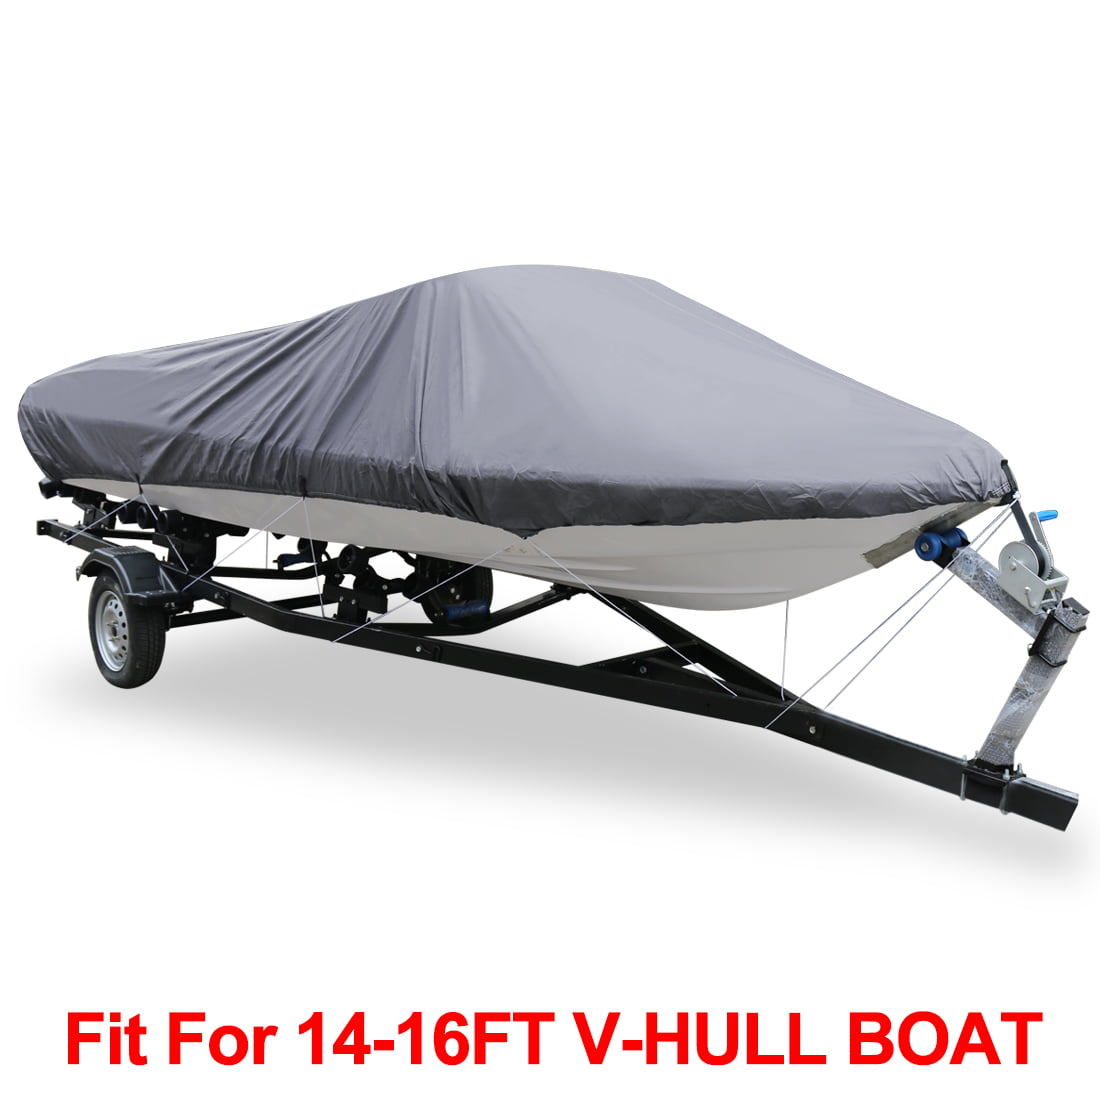 V-Hull 210-Denier Waterproof Boat Cover for 14'-16' Trailerable Fishing Ski Boats Runabout Covers Gray